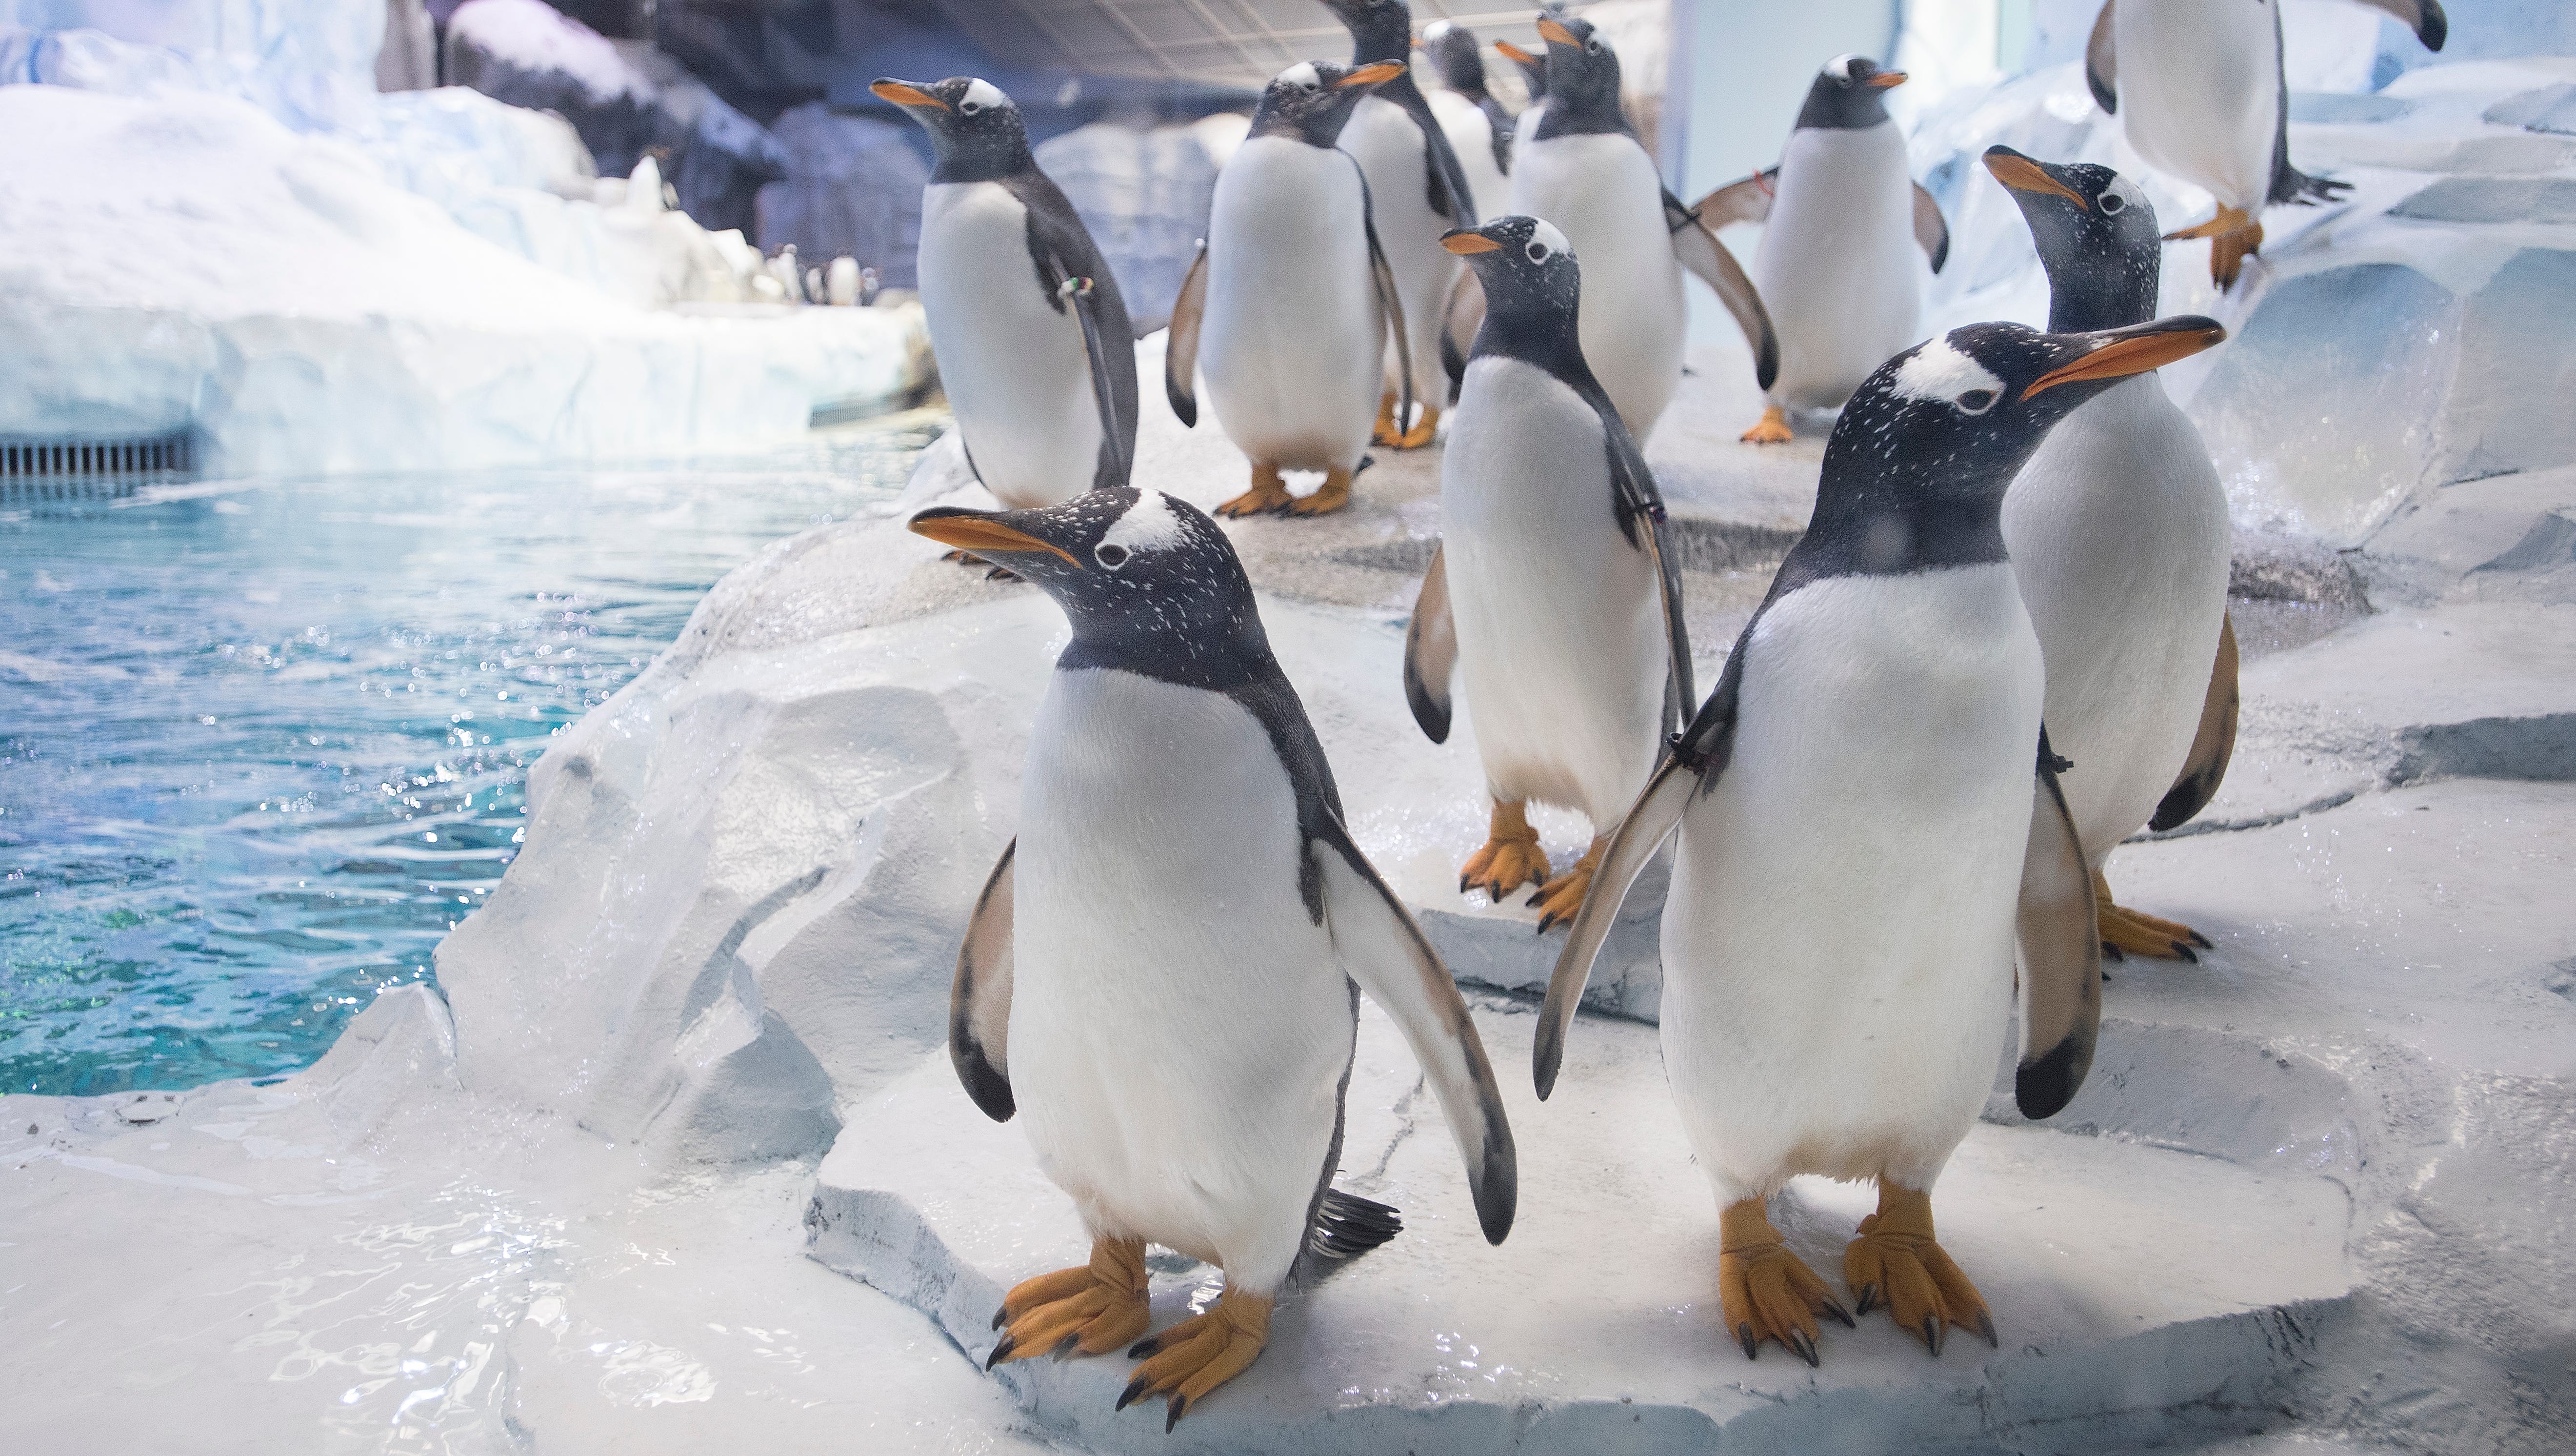 Penguins make their way up to one of the floor-to-ceiling windows, exploring their new habitat and the strange creatures on the other side of the window.